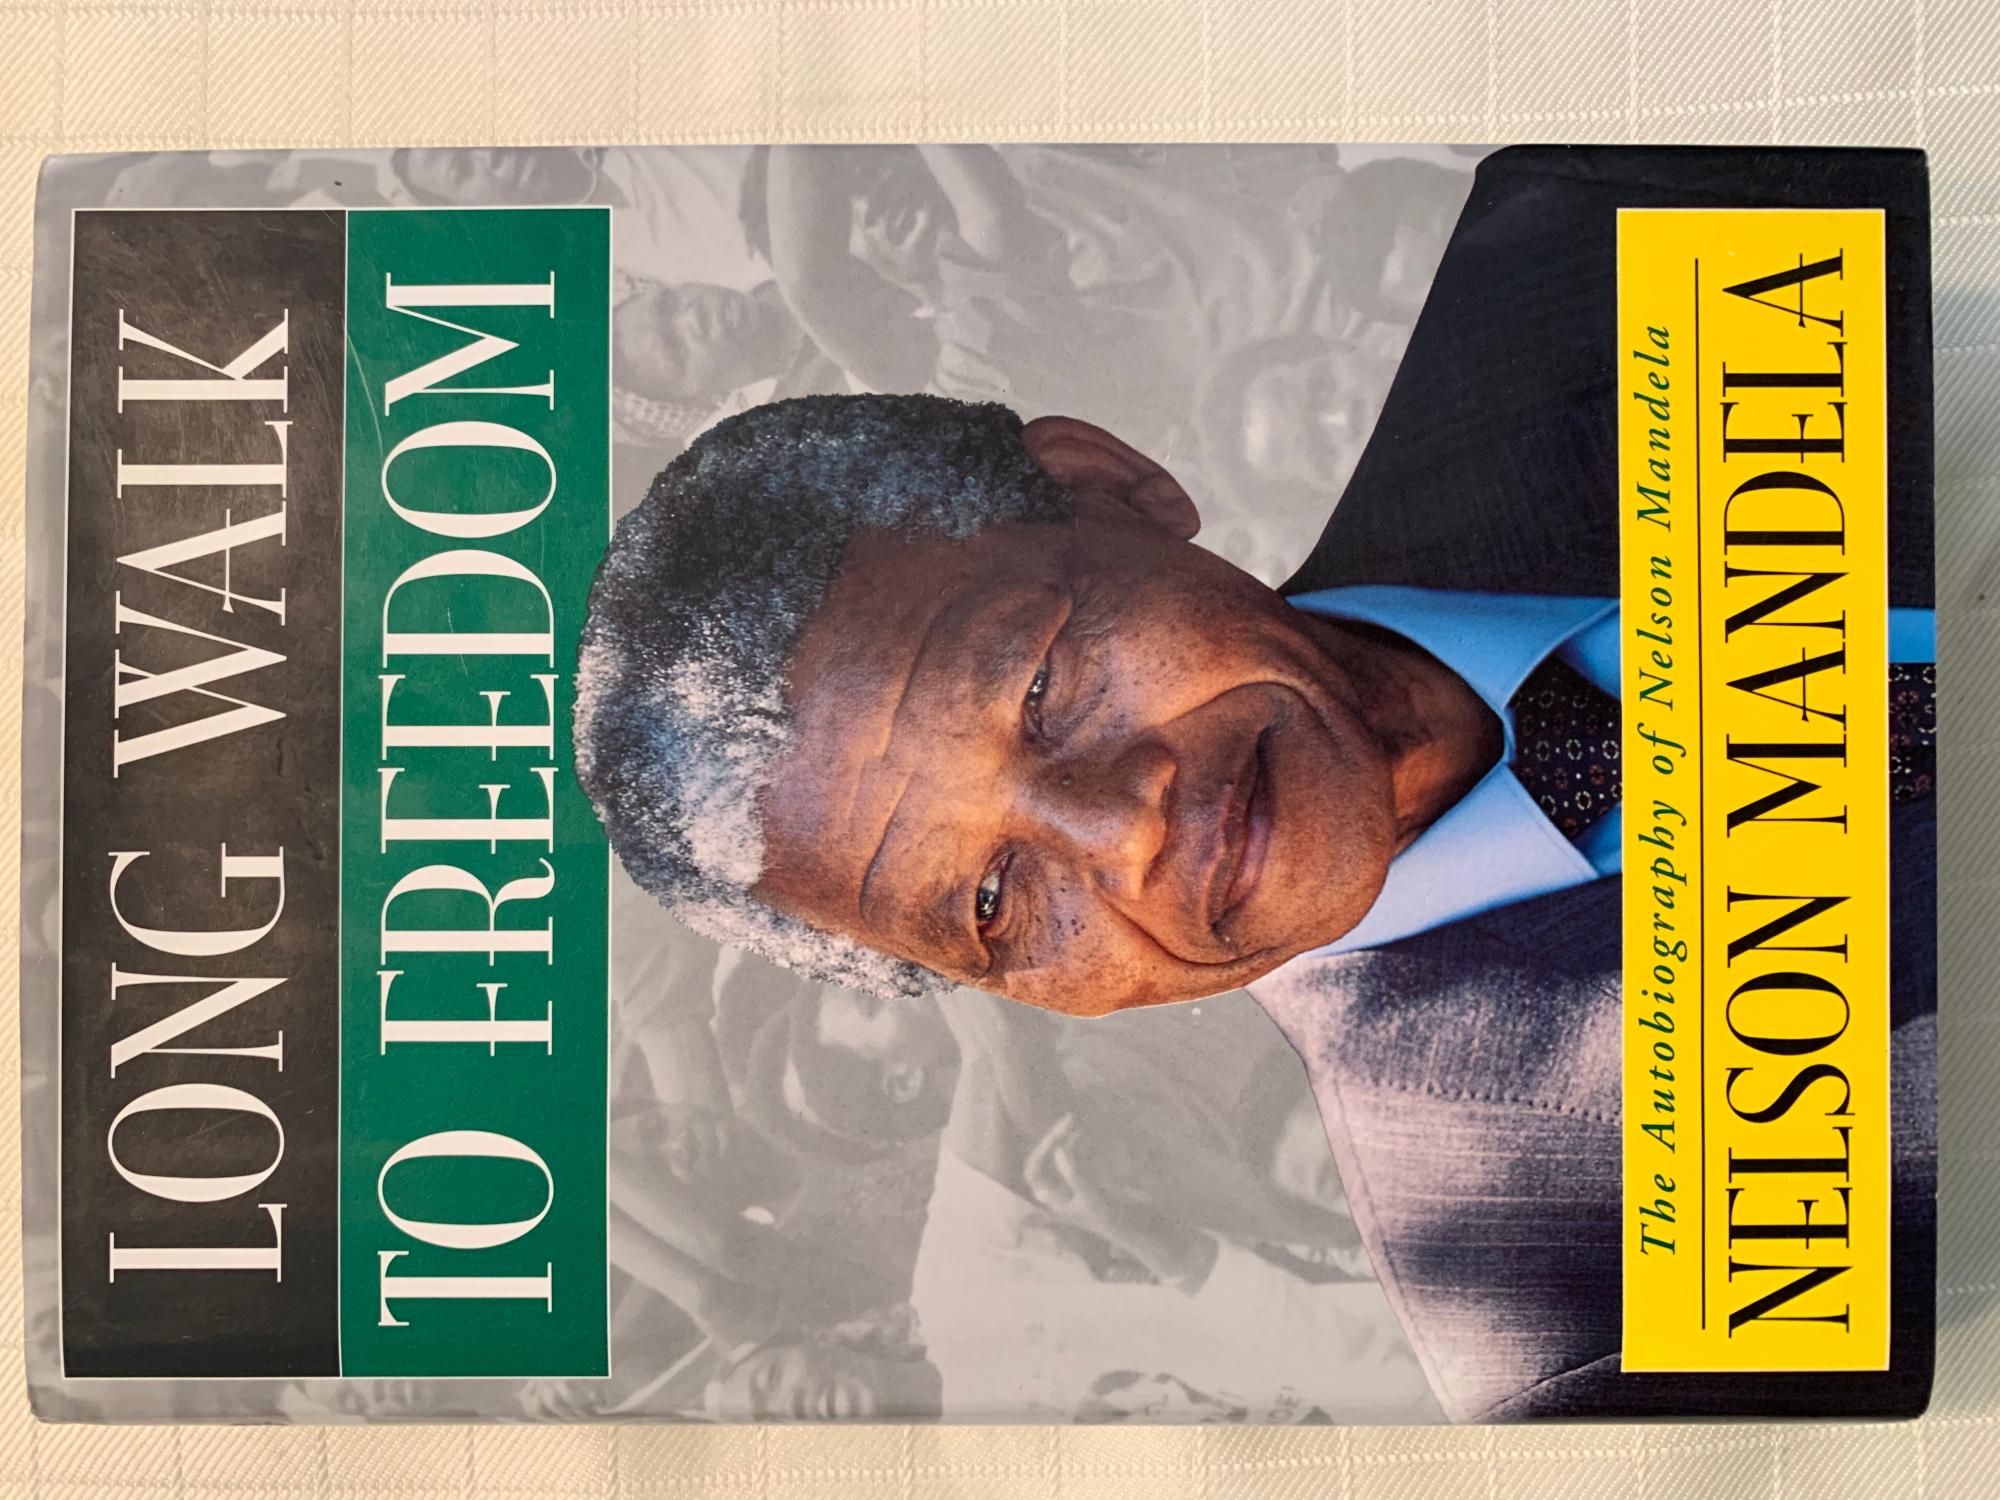 prominent features of nelson mandela autobiography